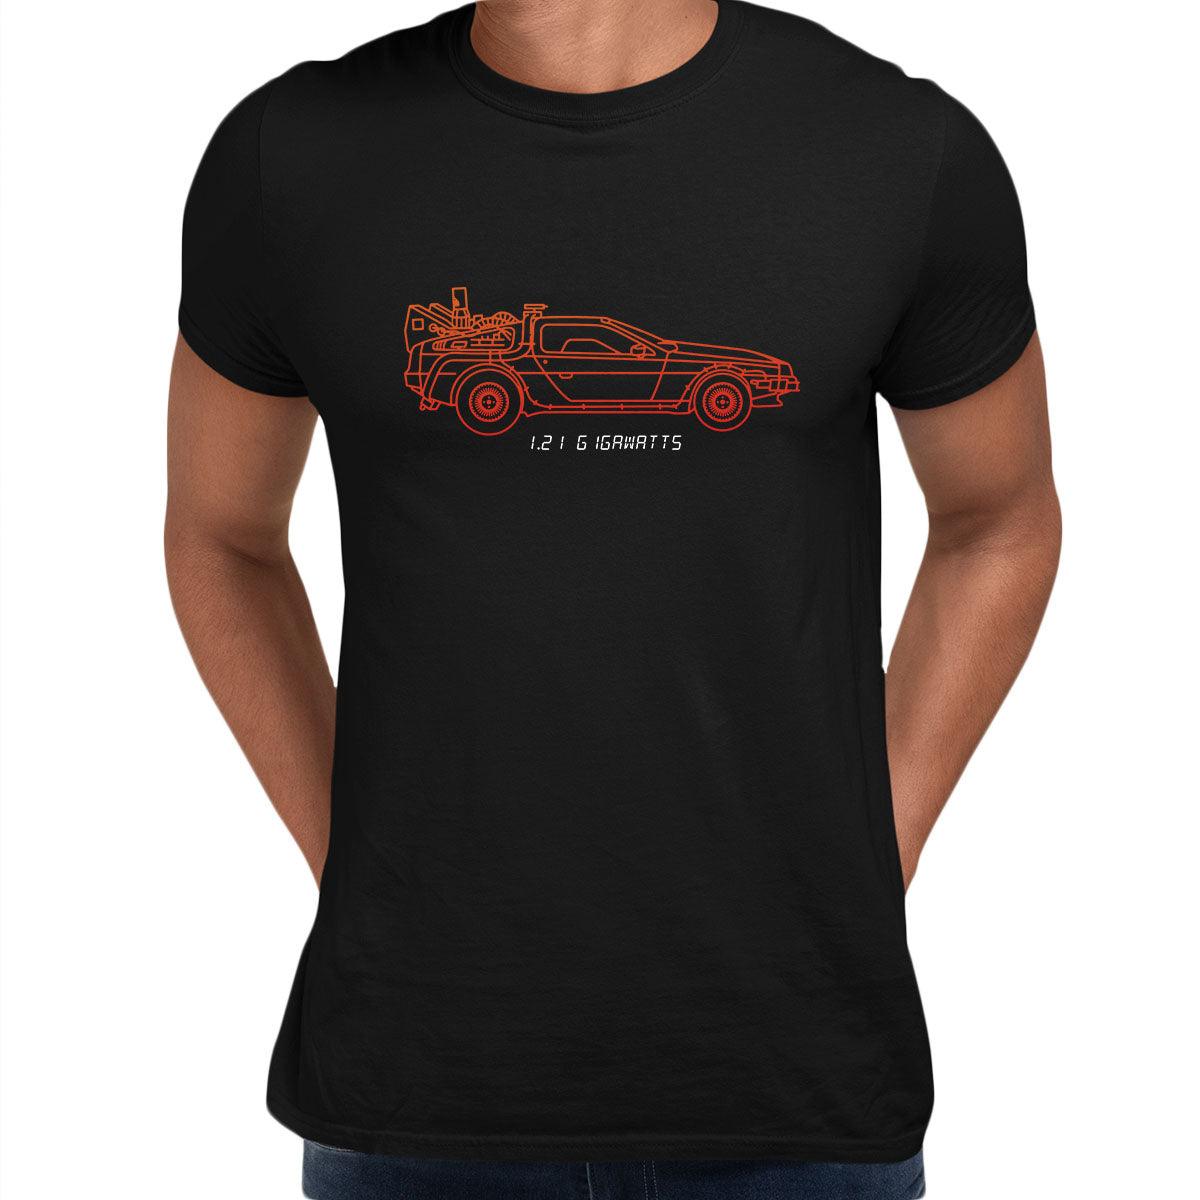 DeLorean Car Back in Time Tee - Retro Design, Movie Car - Takes You Back to Another Era Unisex T-Shirt - Kuzi Tees